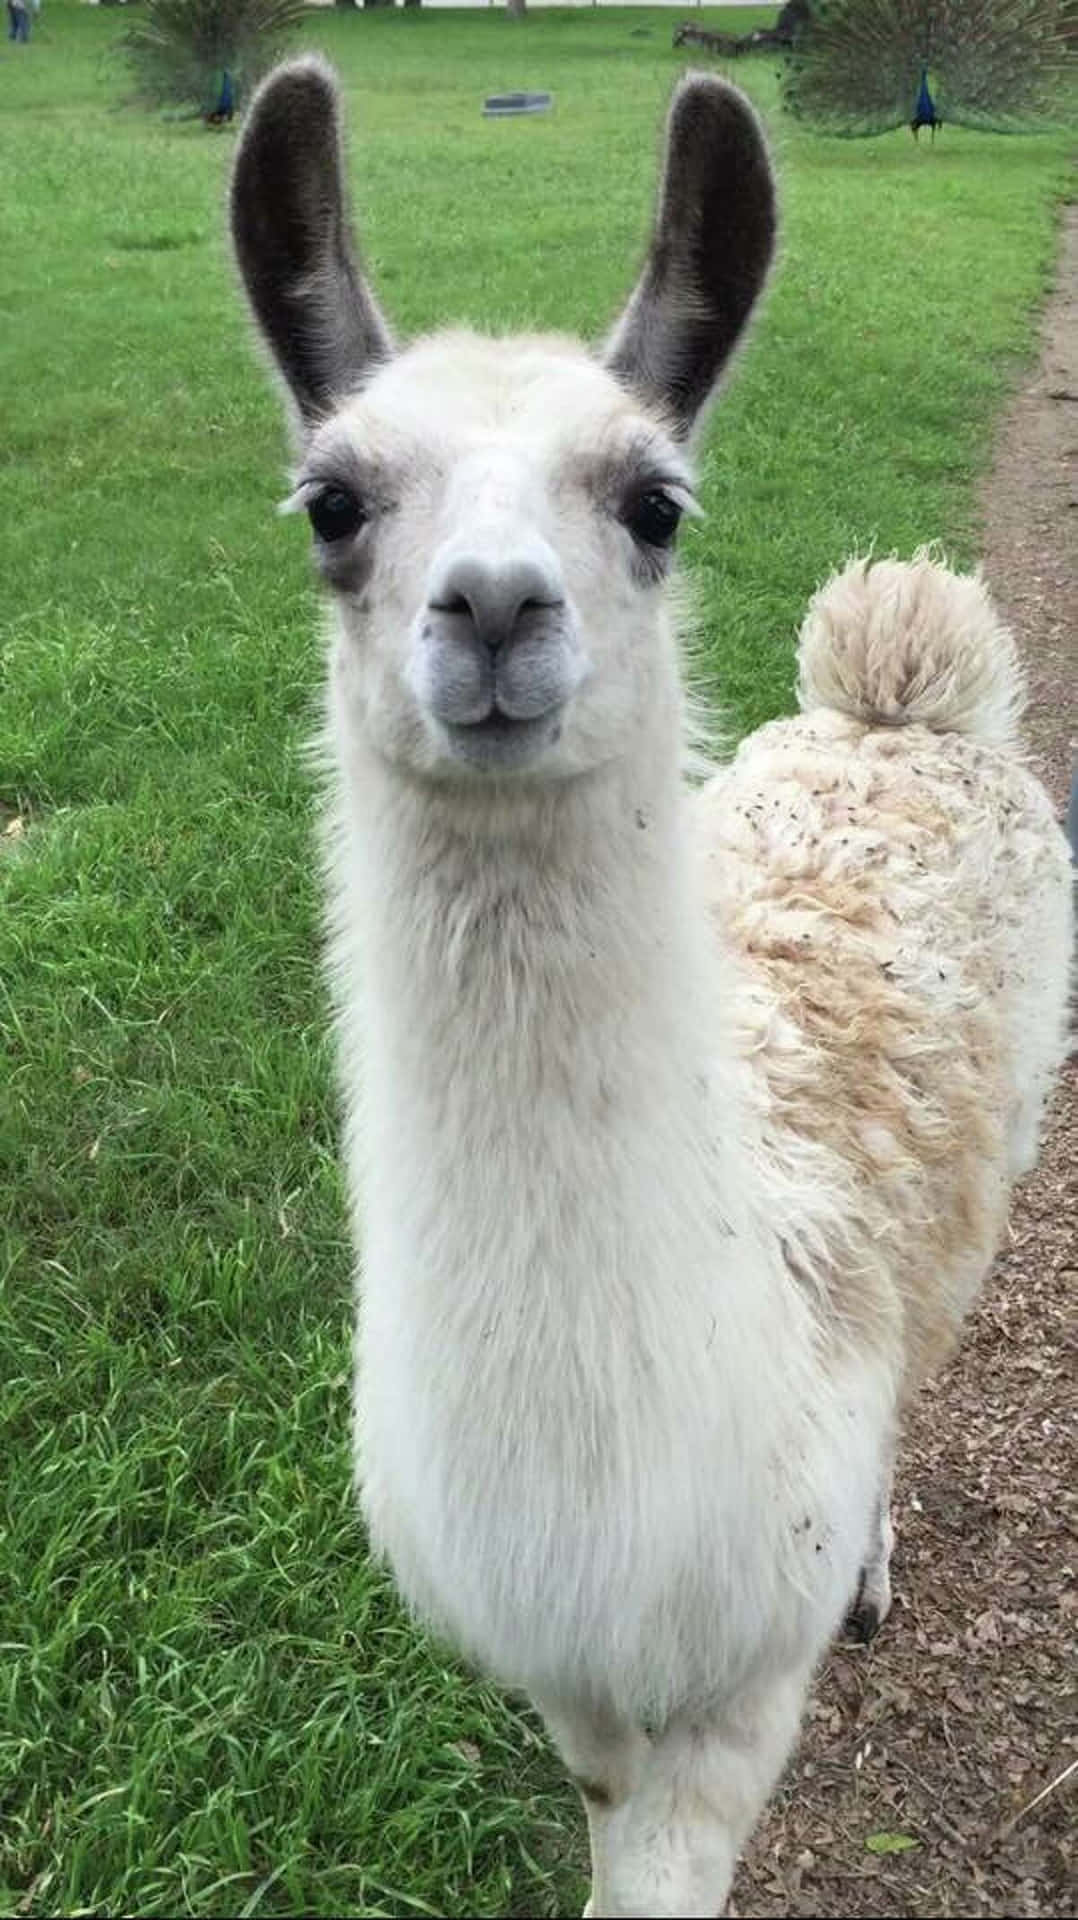 A fluffy and playful alpaca in its natural habitat.